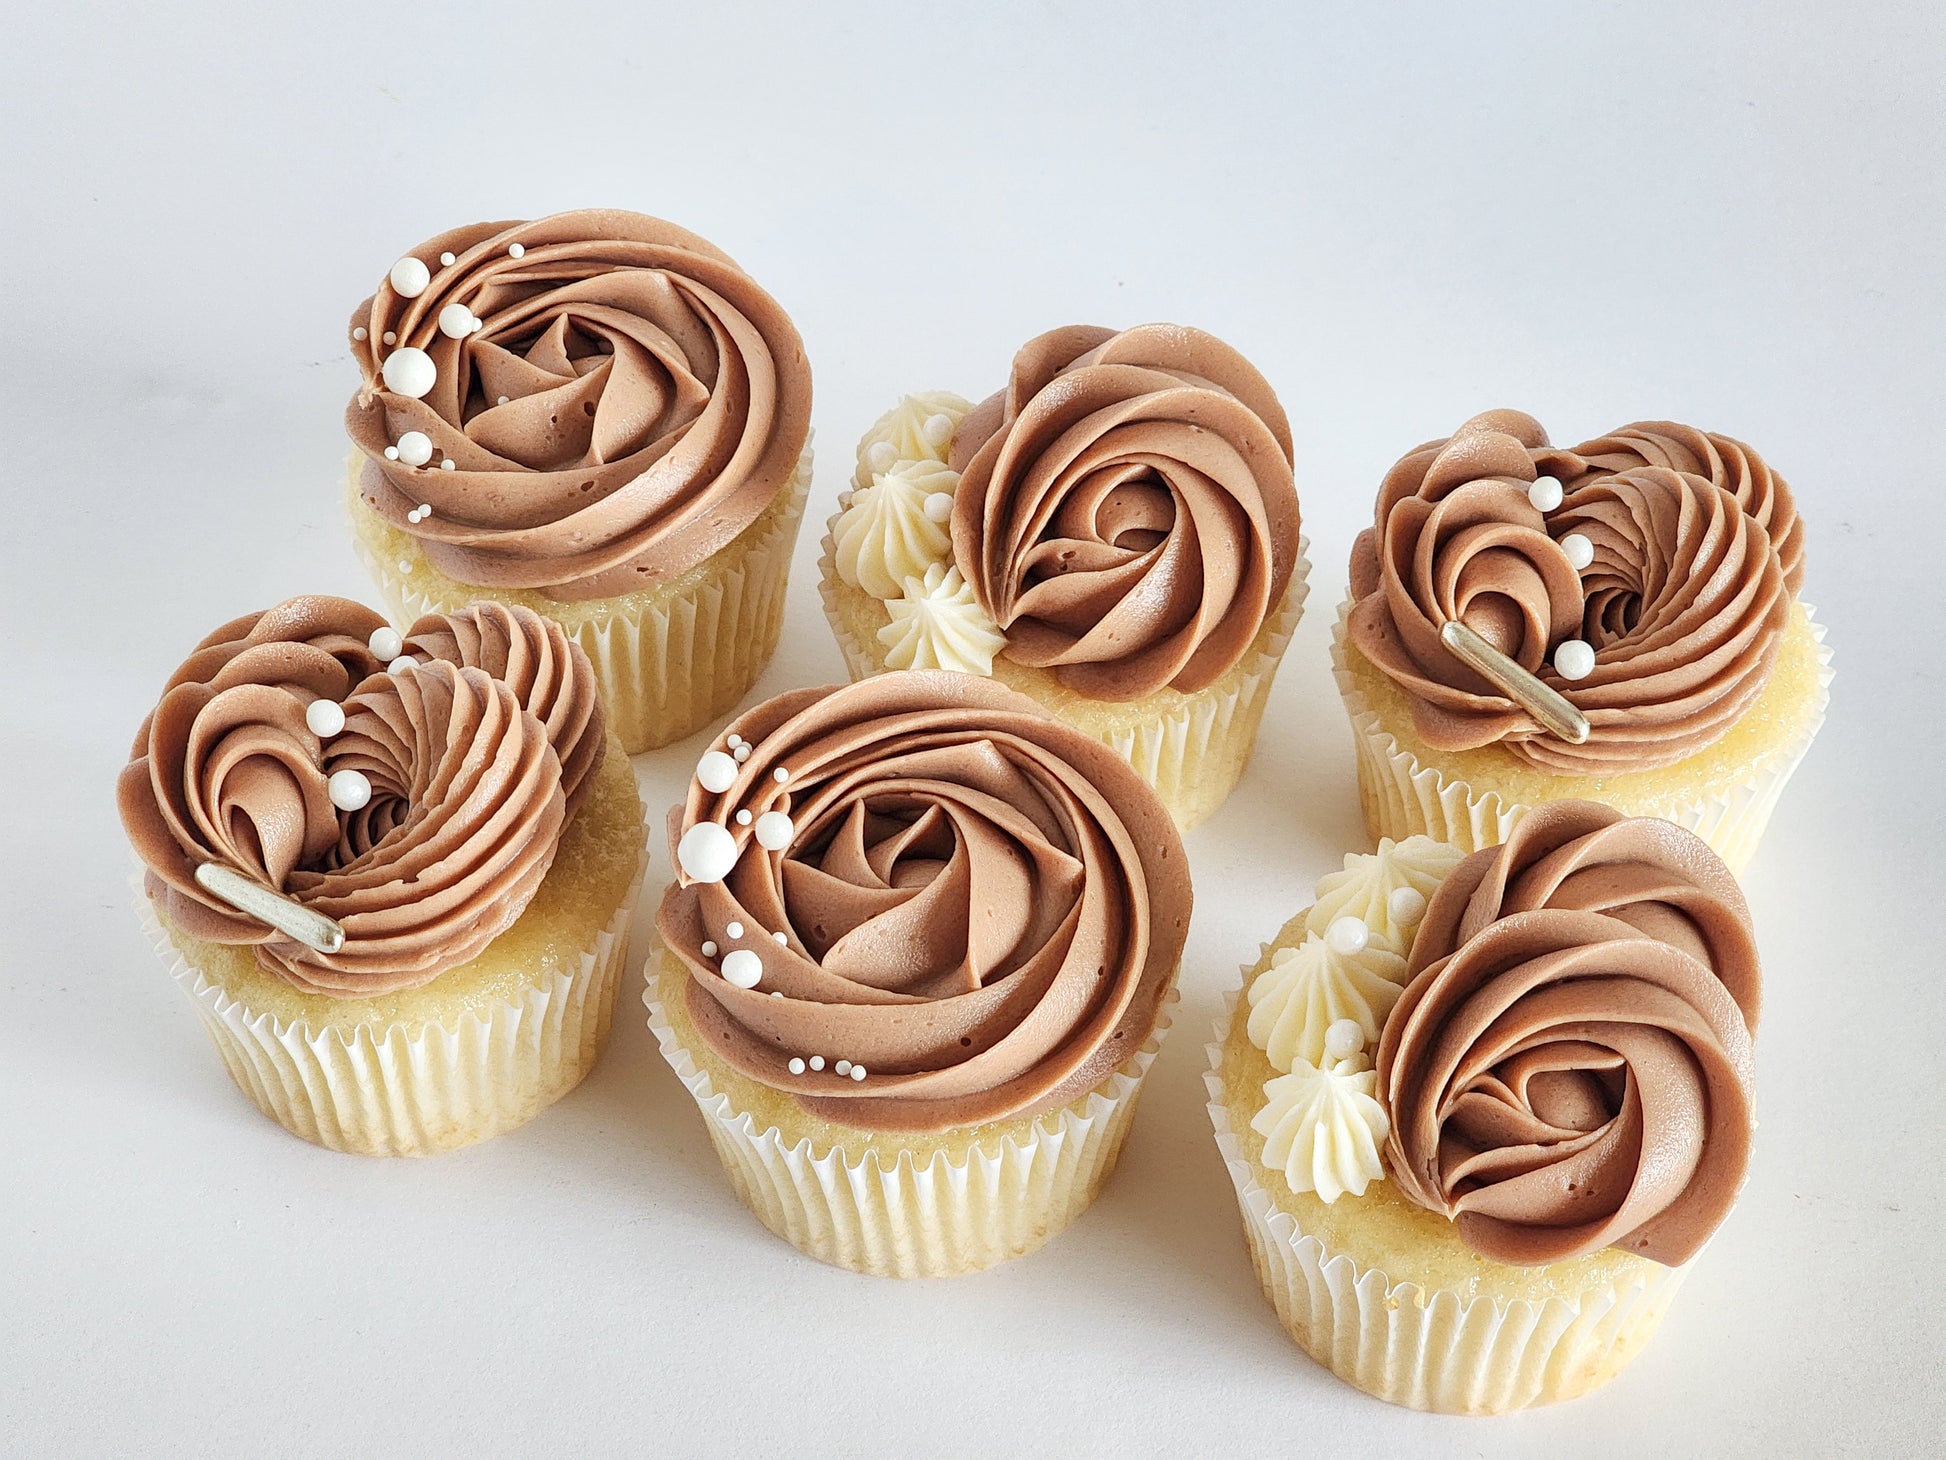 Chocolate swiss meringue buttercream frosting so easy to make